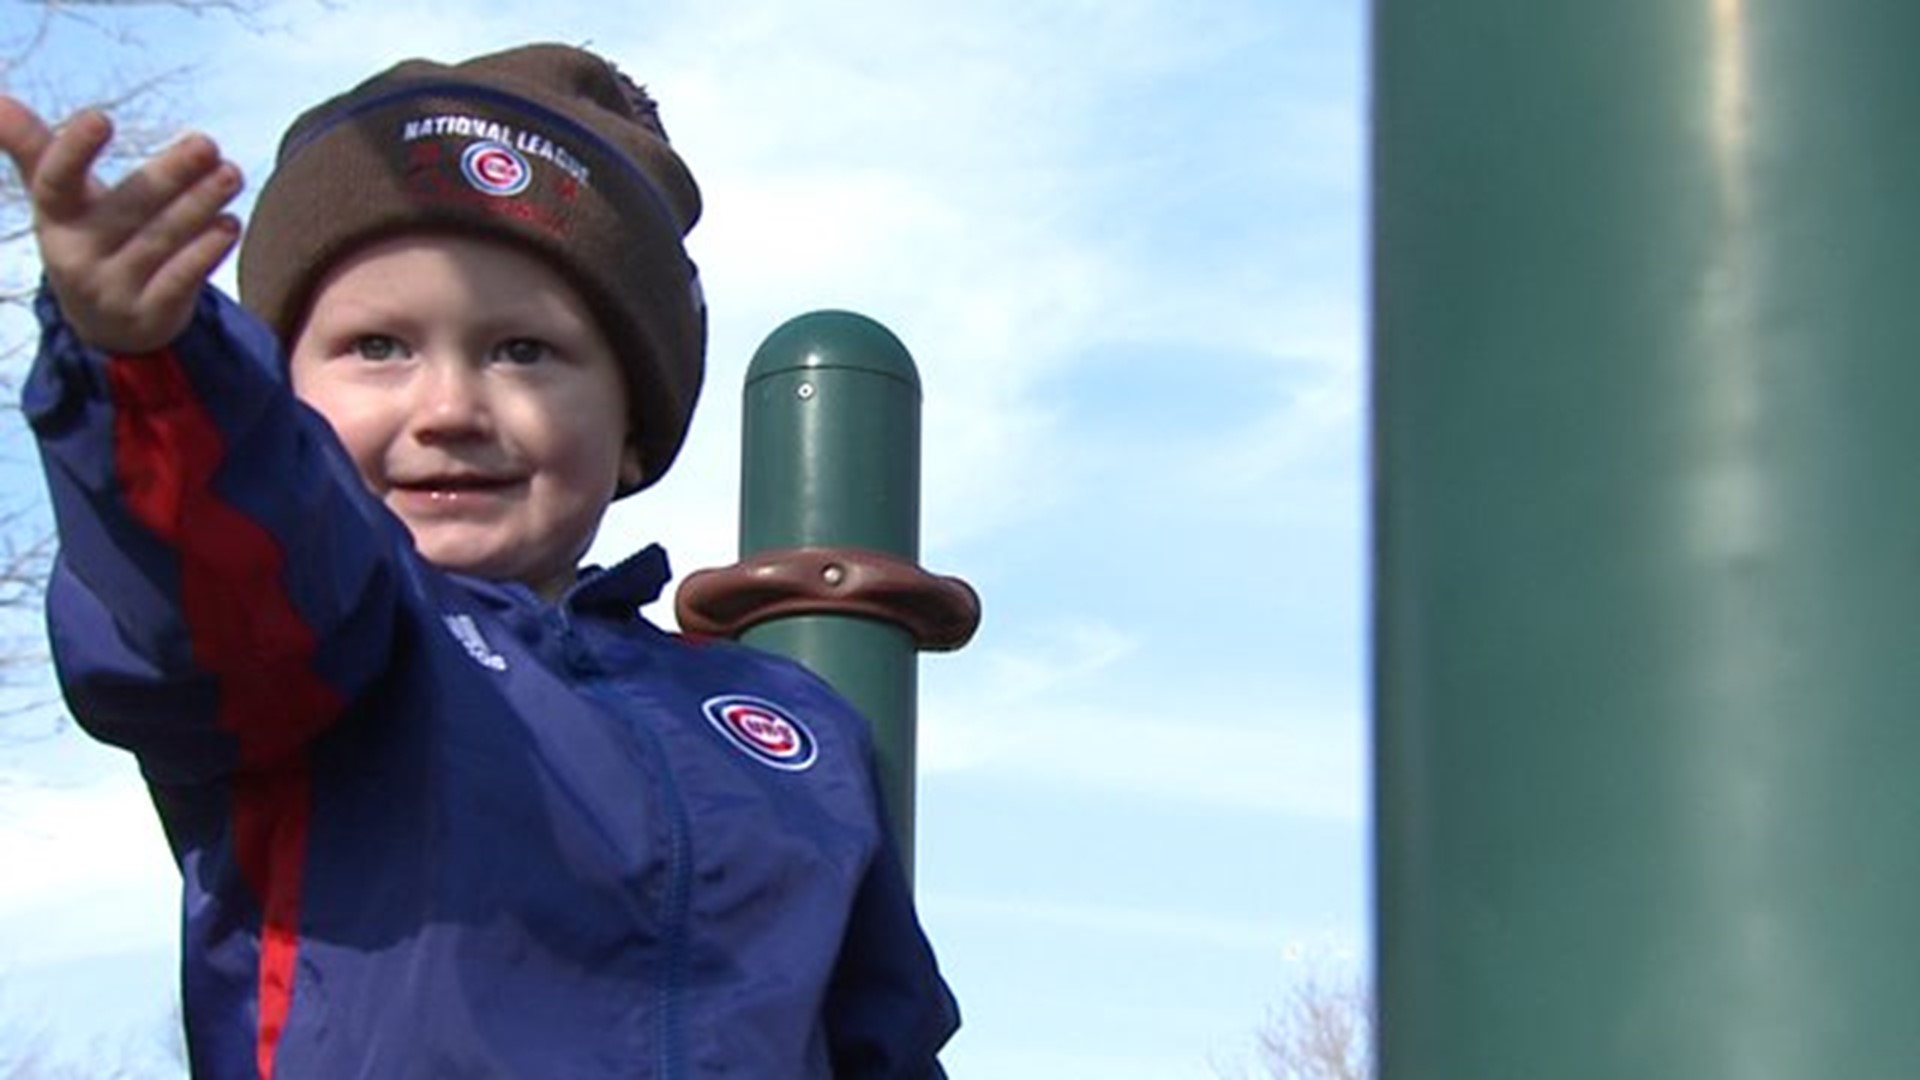 Parker Hopkins stays strong after Cubs win World Series